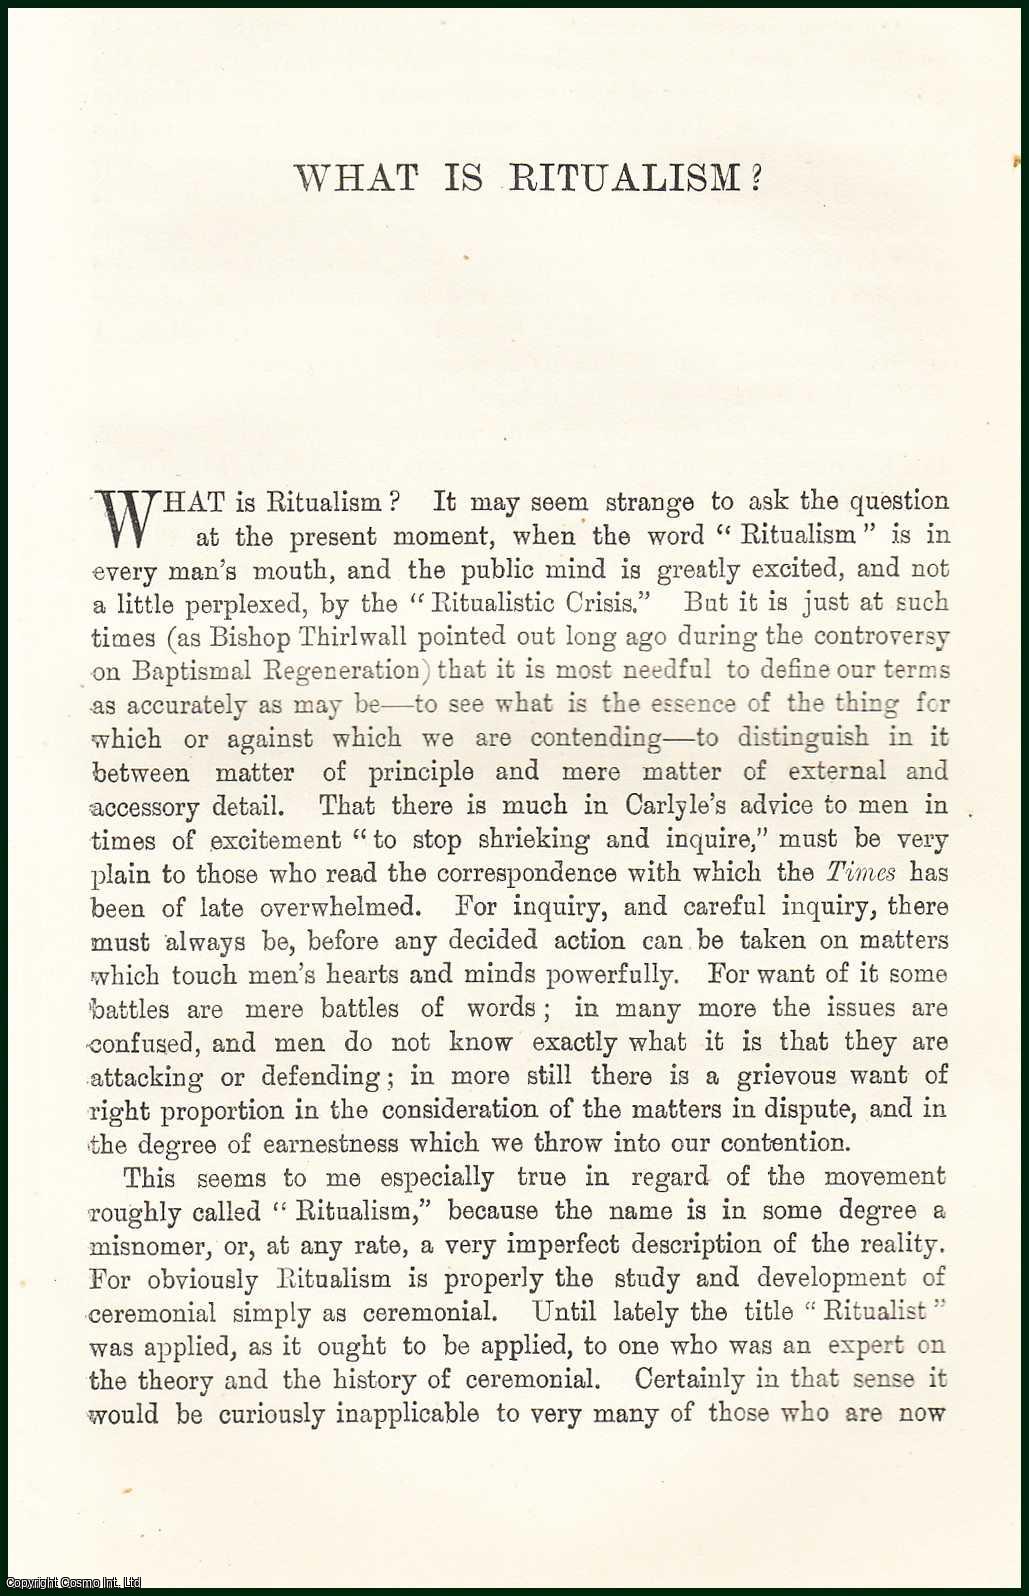 Alfred Barry - What is Ritualism. An uncommon original article from the Contemporary Review, 1898.